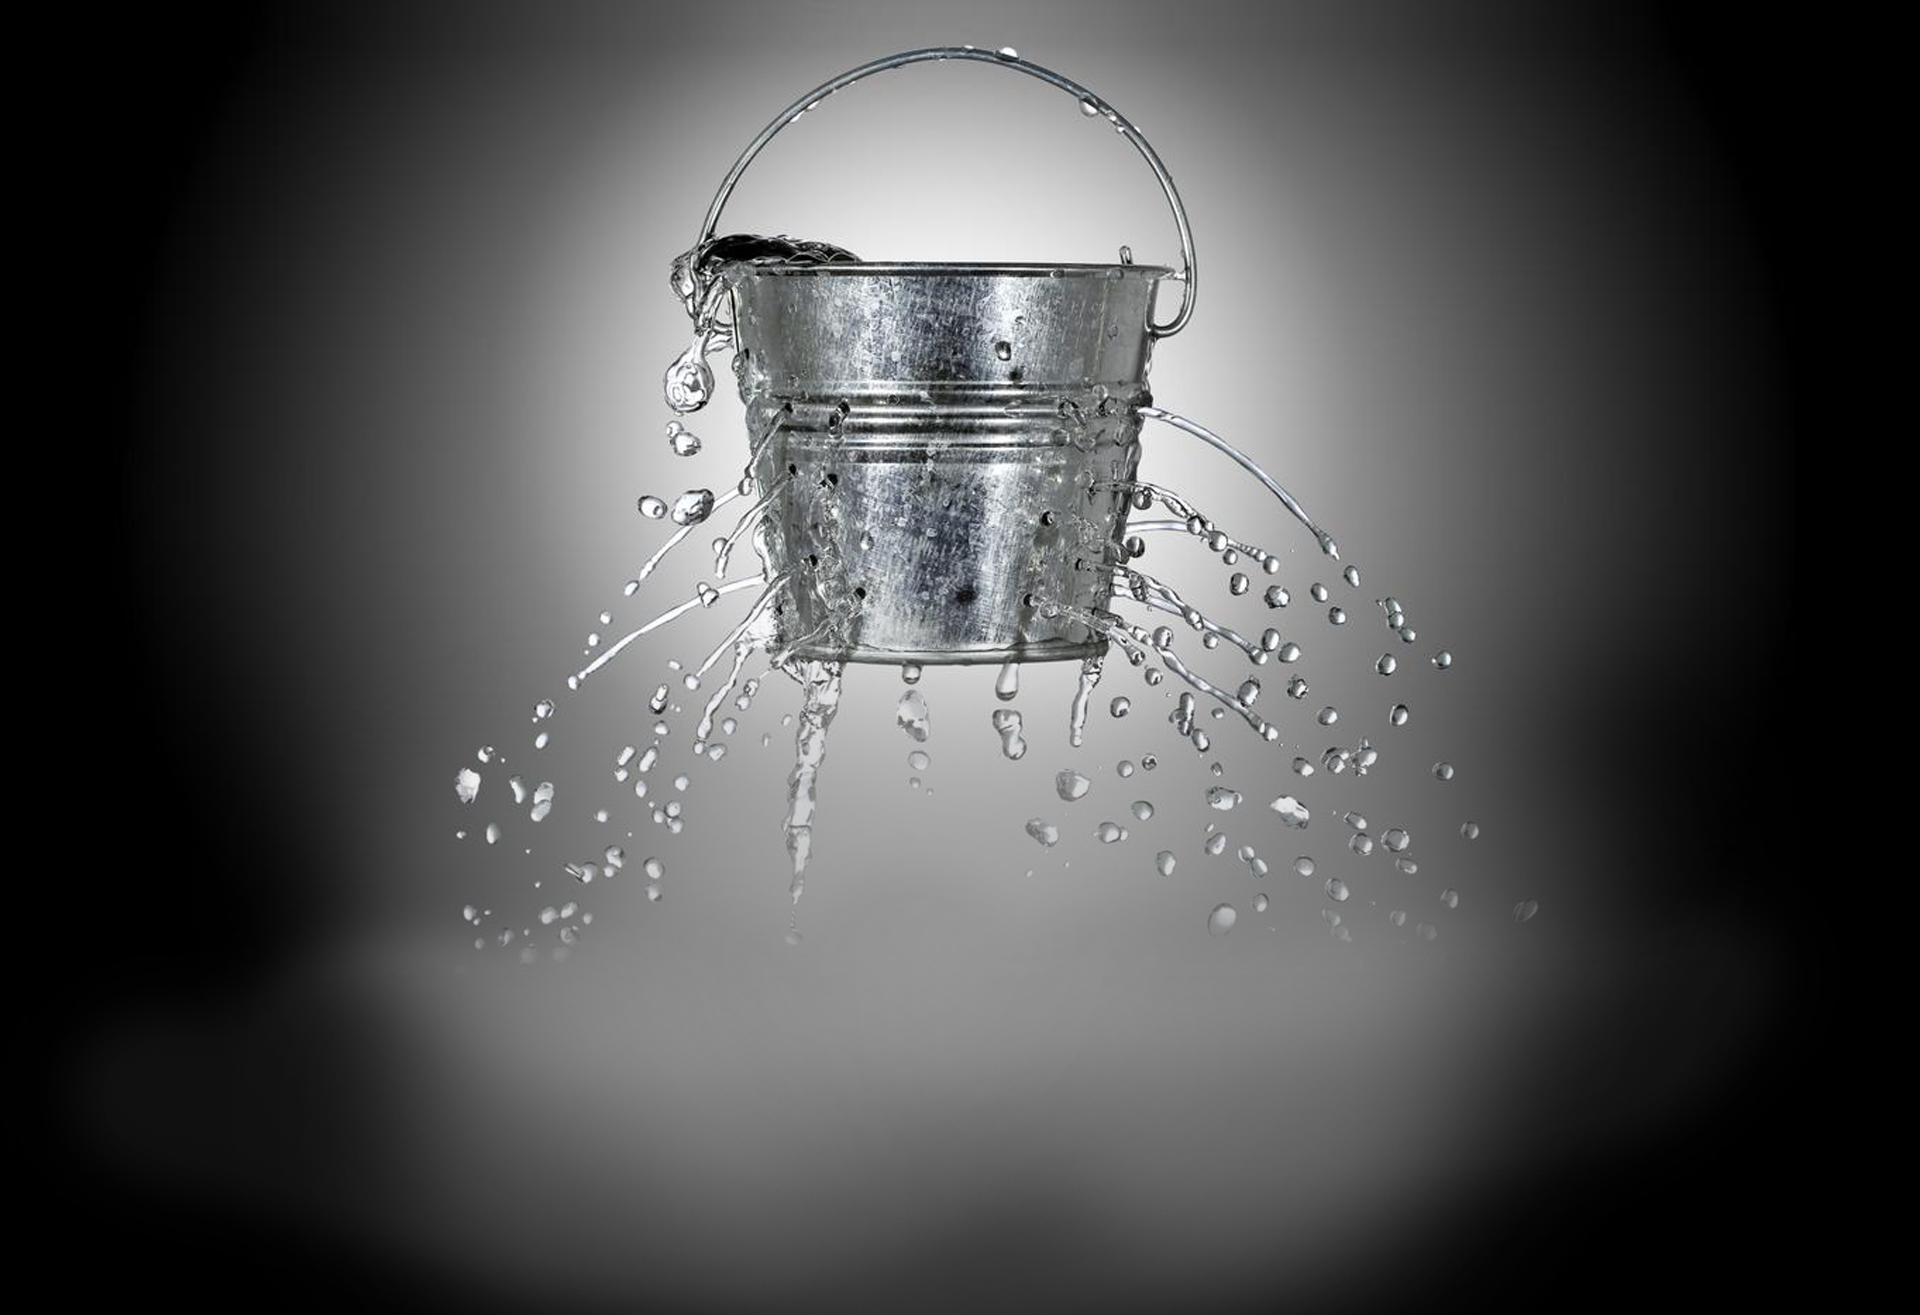 A bucket which is leaking due to many holes punctured in its metal.